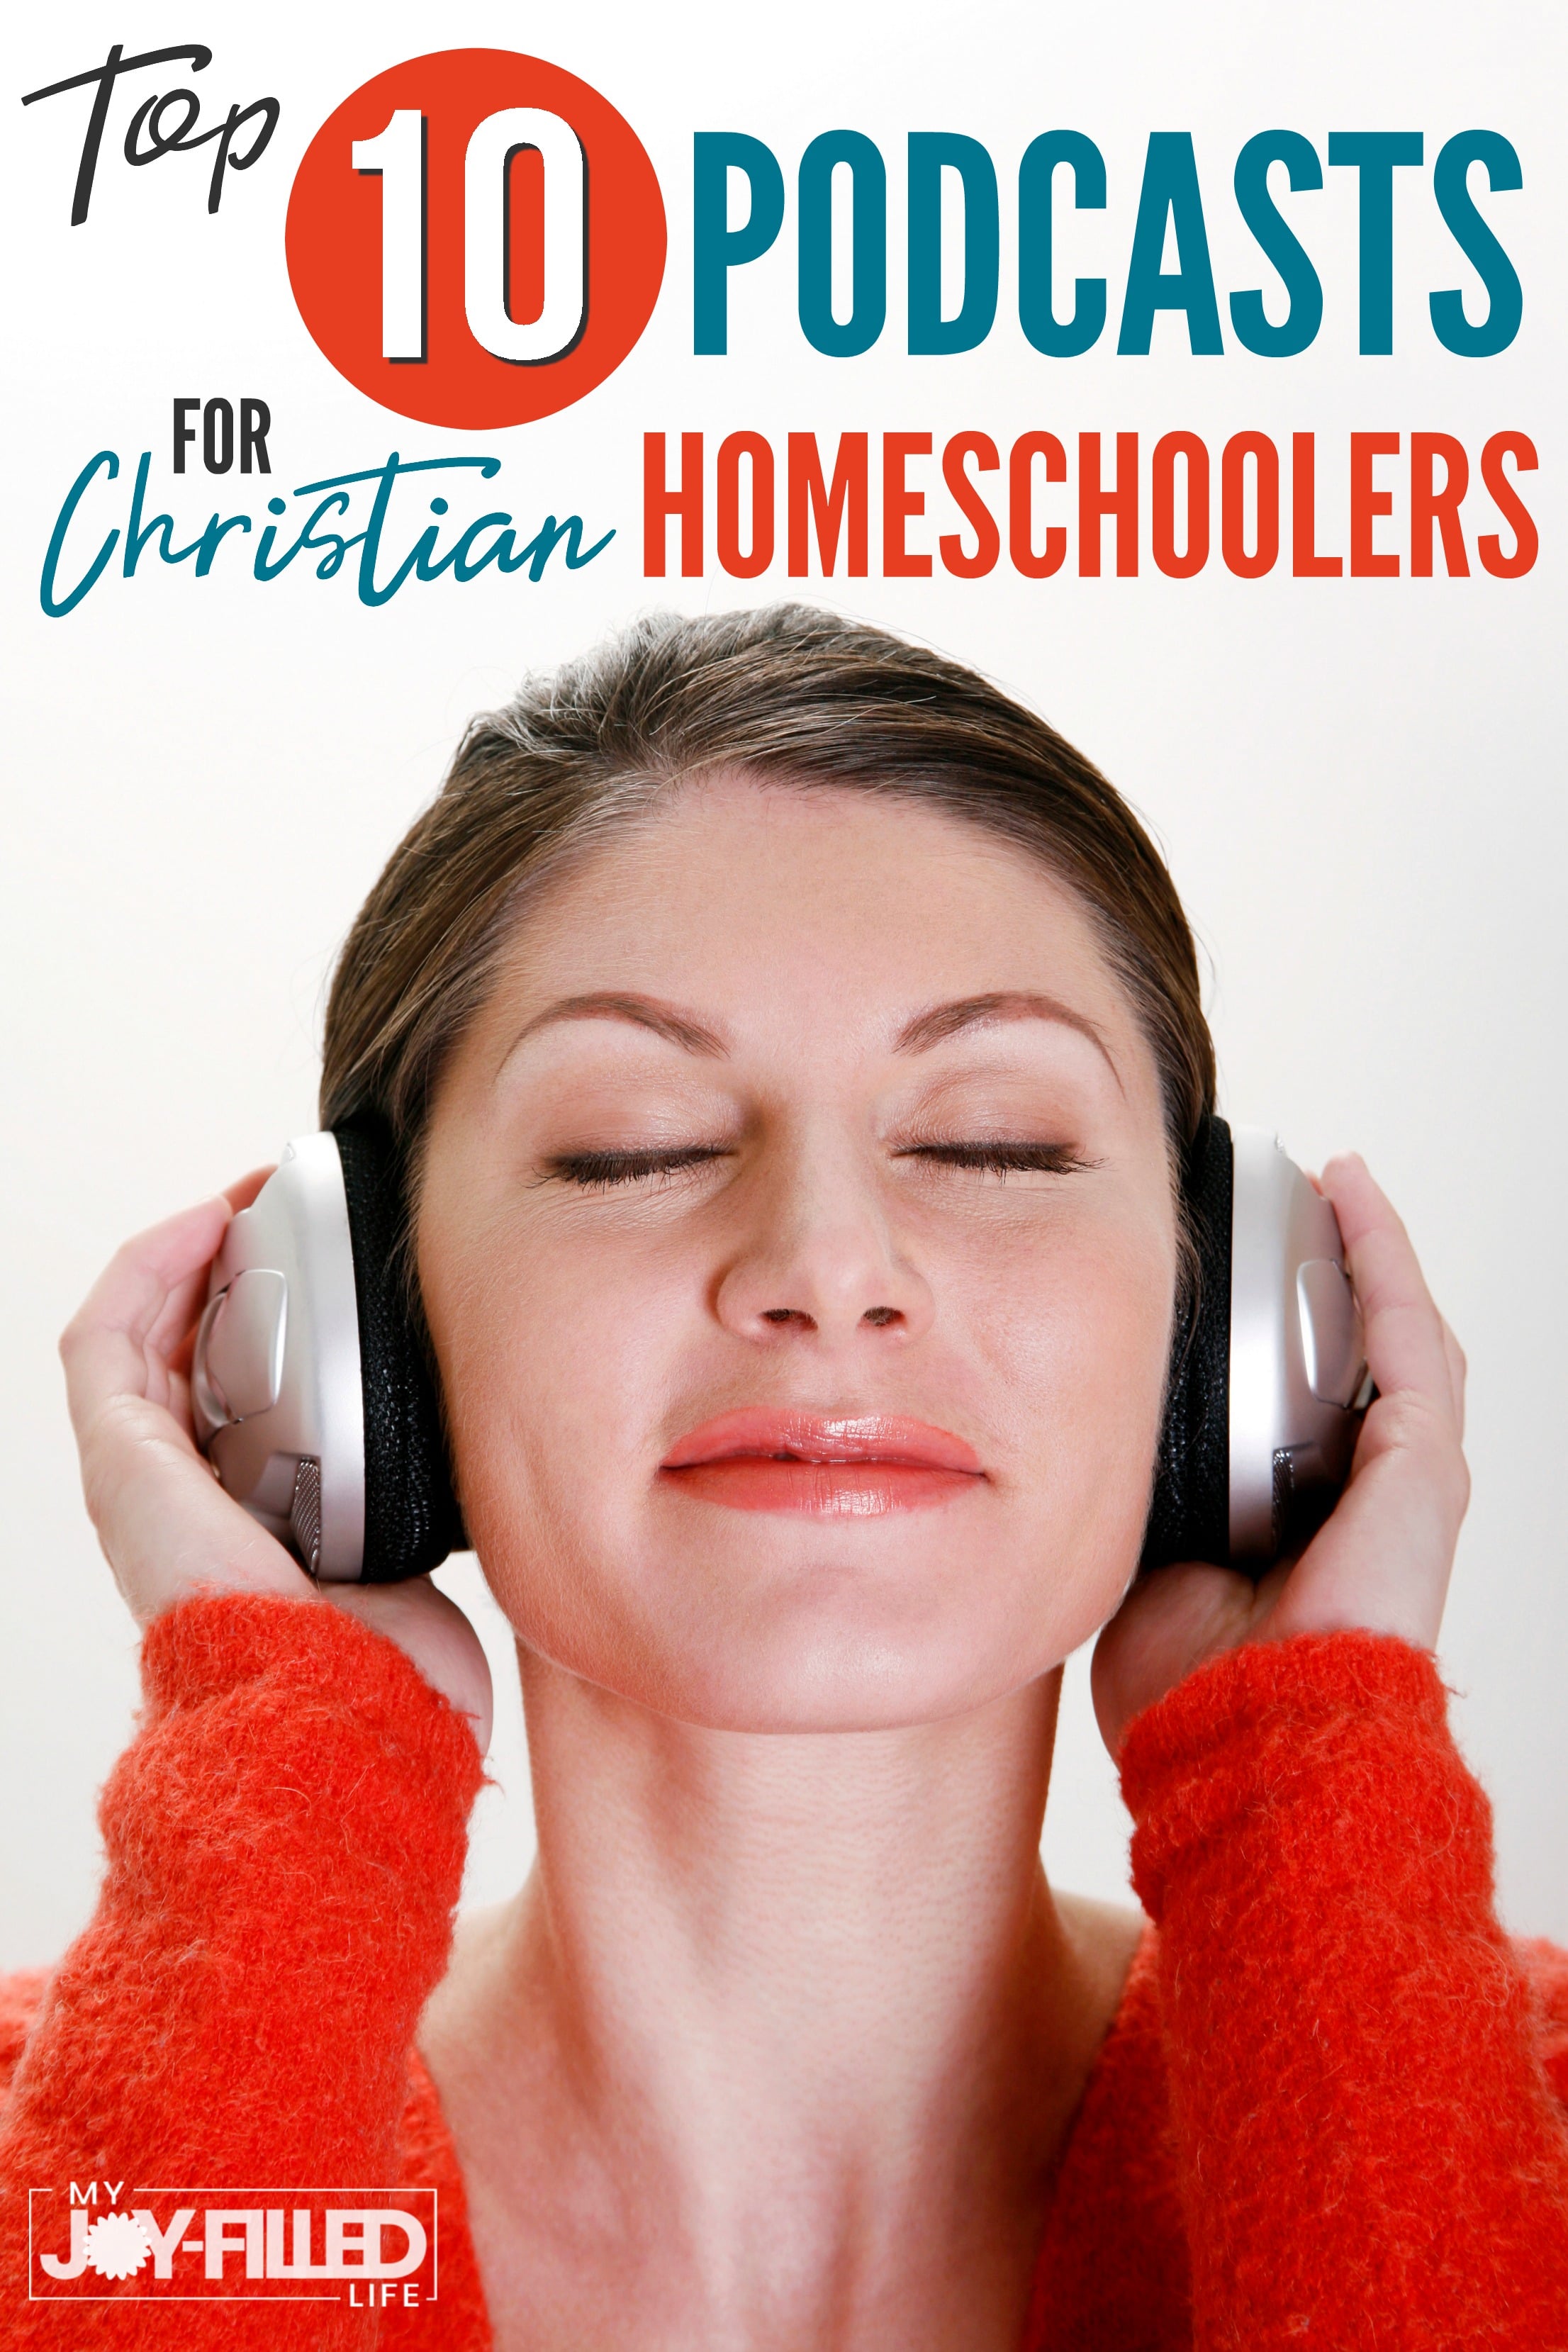 Looking for great podcasts for Christian homeschoolers? This article samples some of the best Christian homeschool podcasts out there. Enjoy! #podcast #homeschoolpodcast #christianpodcast